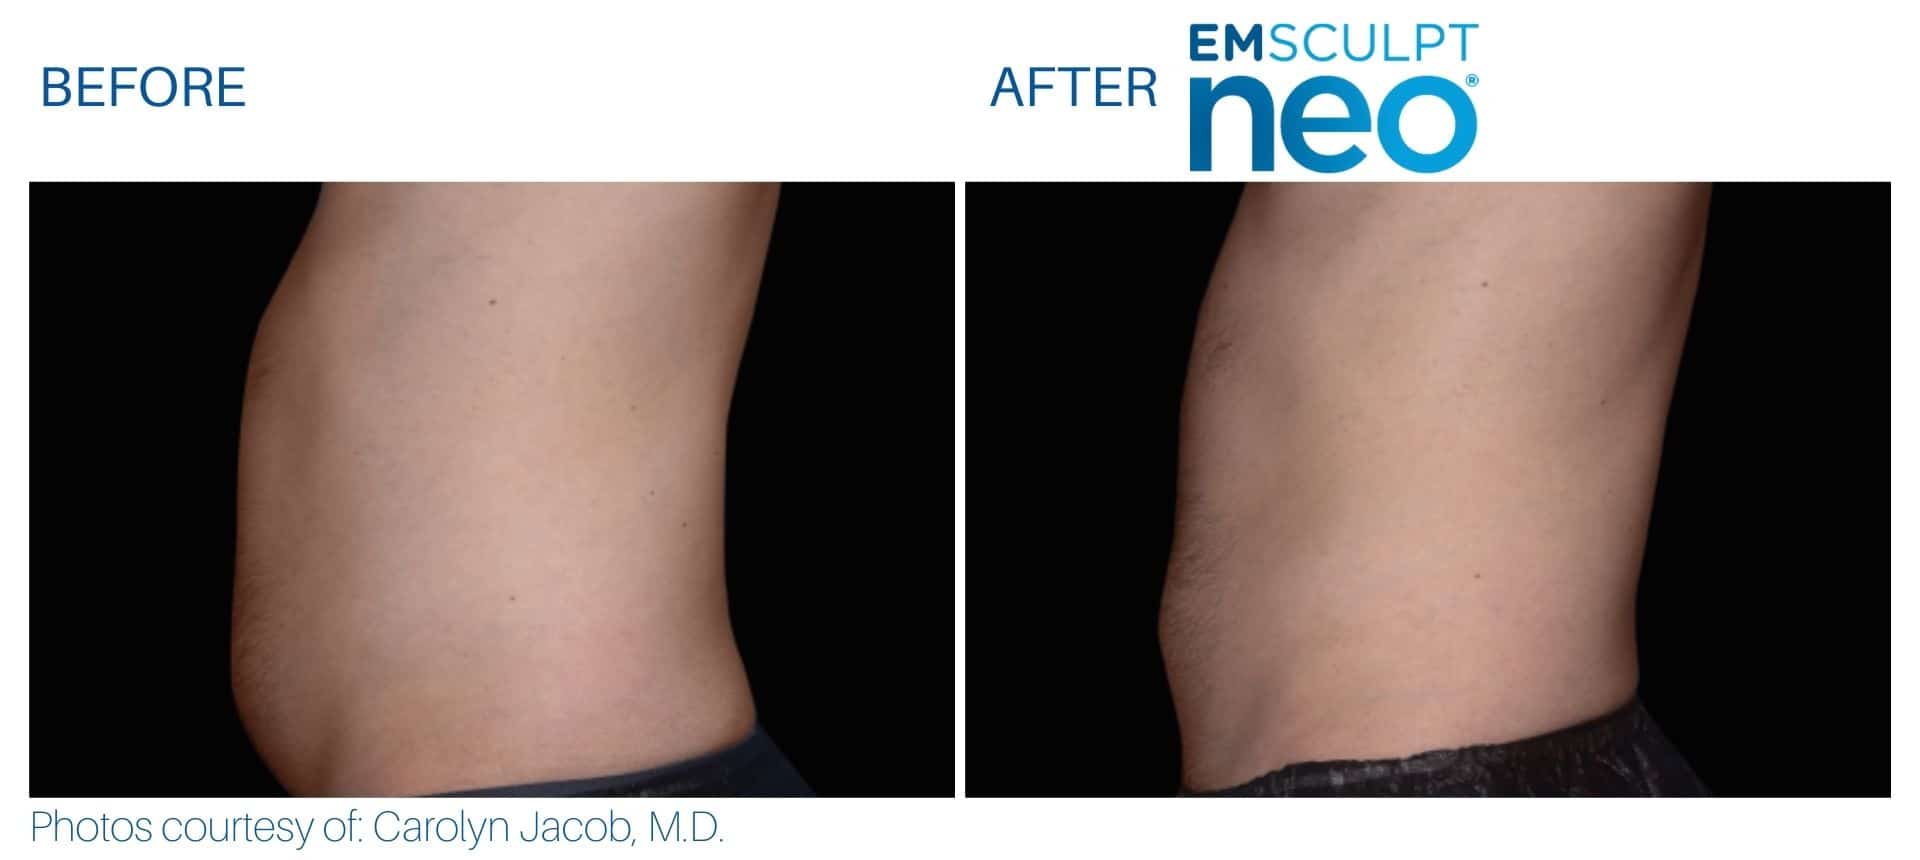 Emsculpt neo belly fat treatment before and after